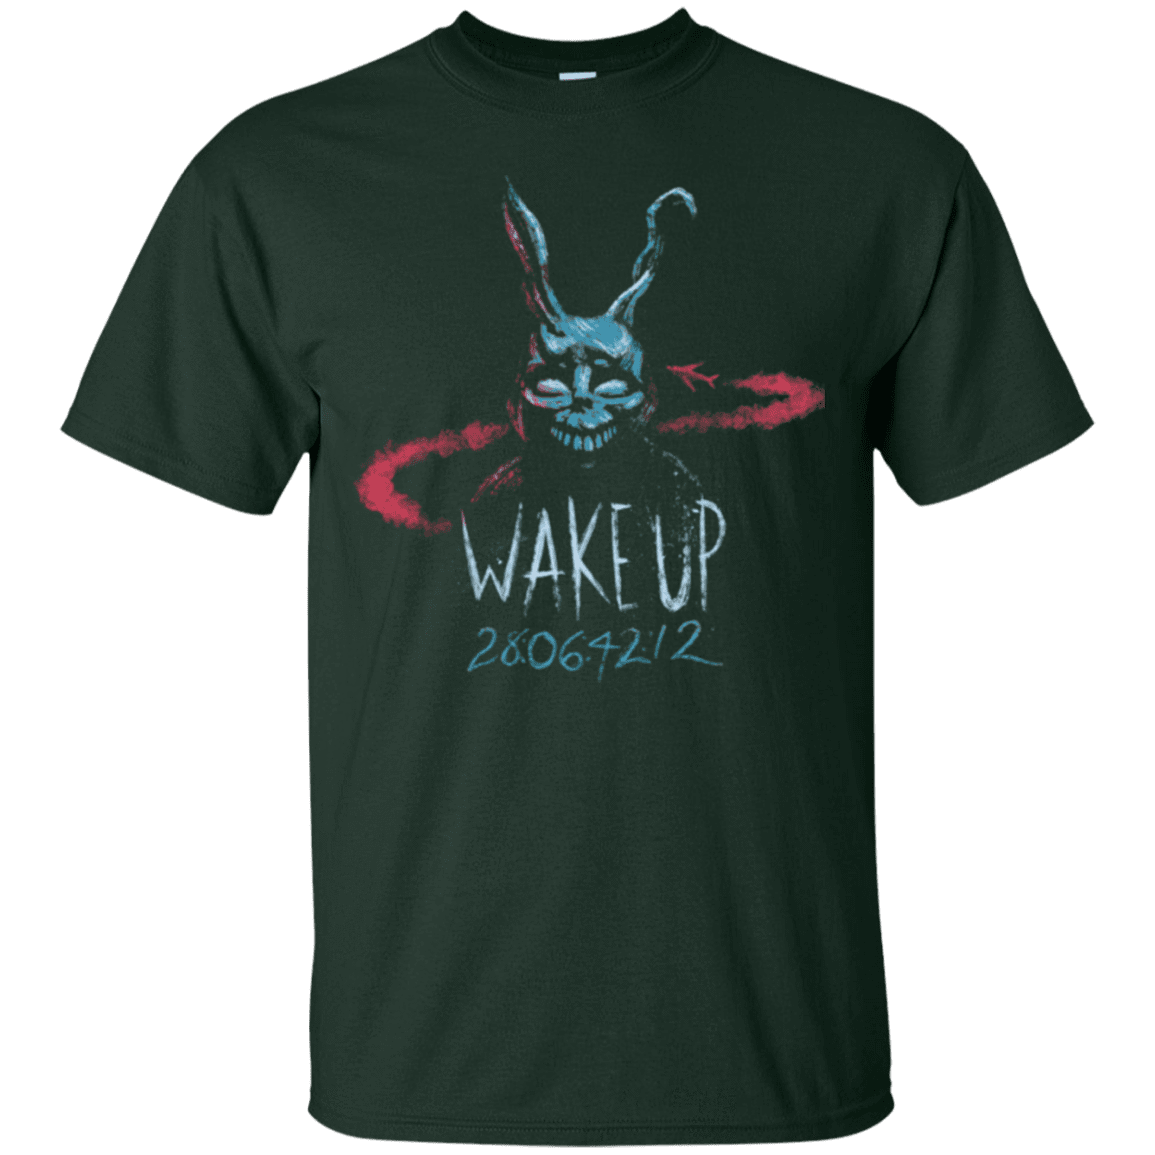 T-Shirts Forest Green / Small Wake up 28064212 T-Shirt